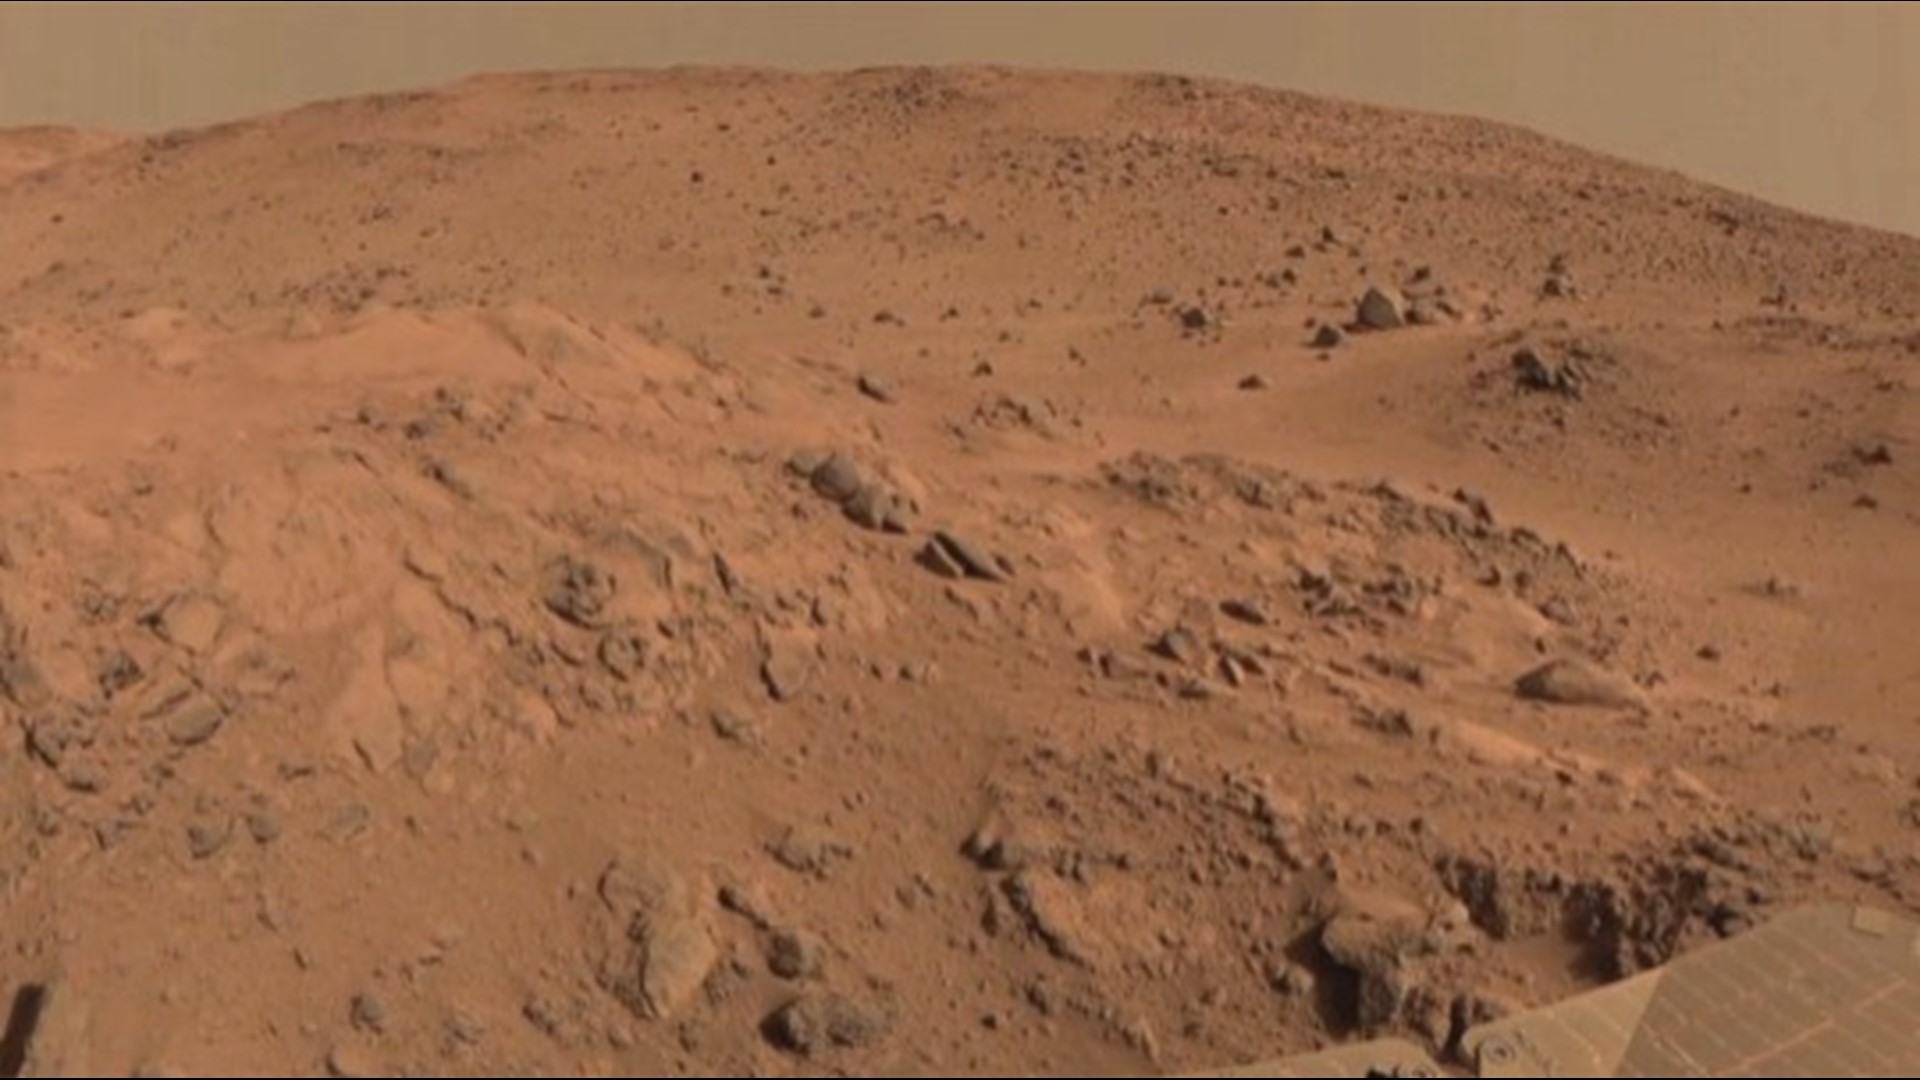 Recreating Martian soil has revealed yet another hurdle for life on Mars.